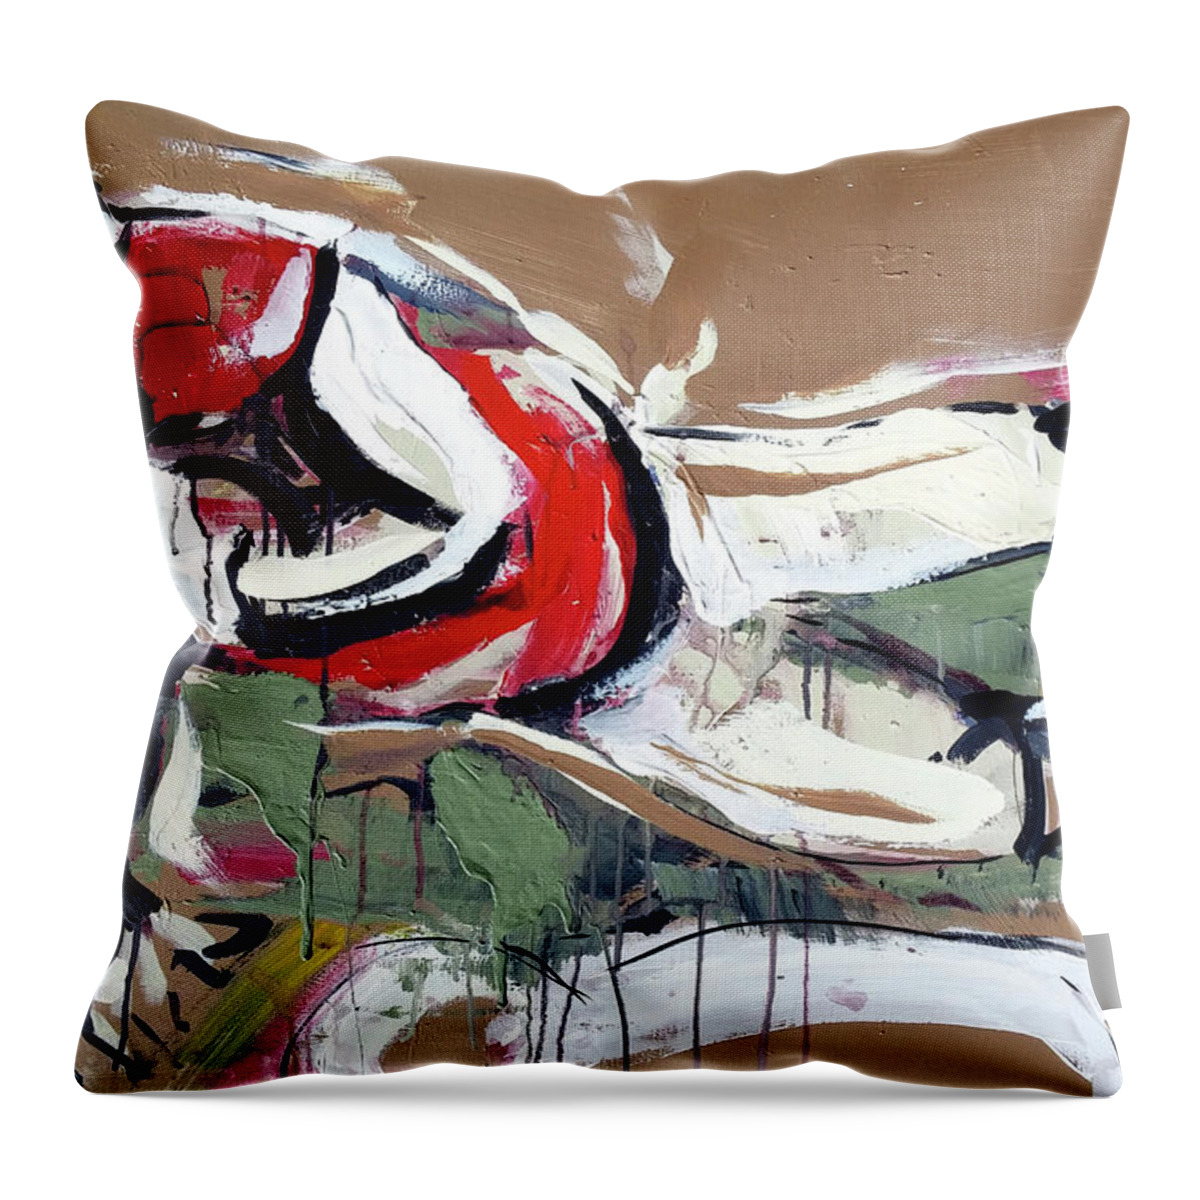  Throw Pillow featuring the painting The touchdown by John Gholson